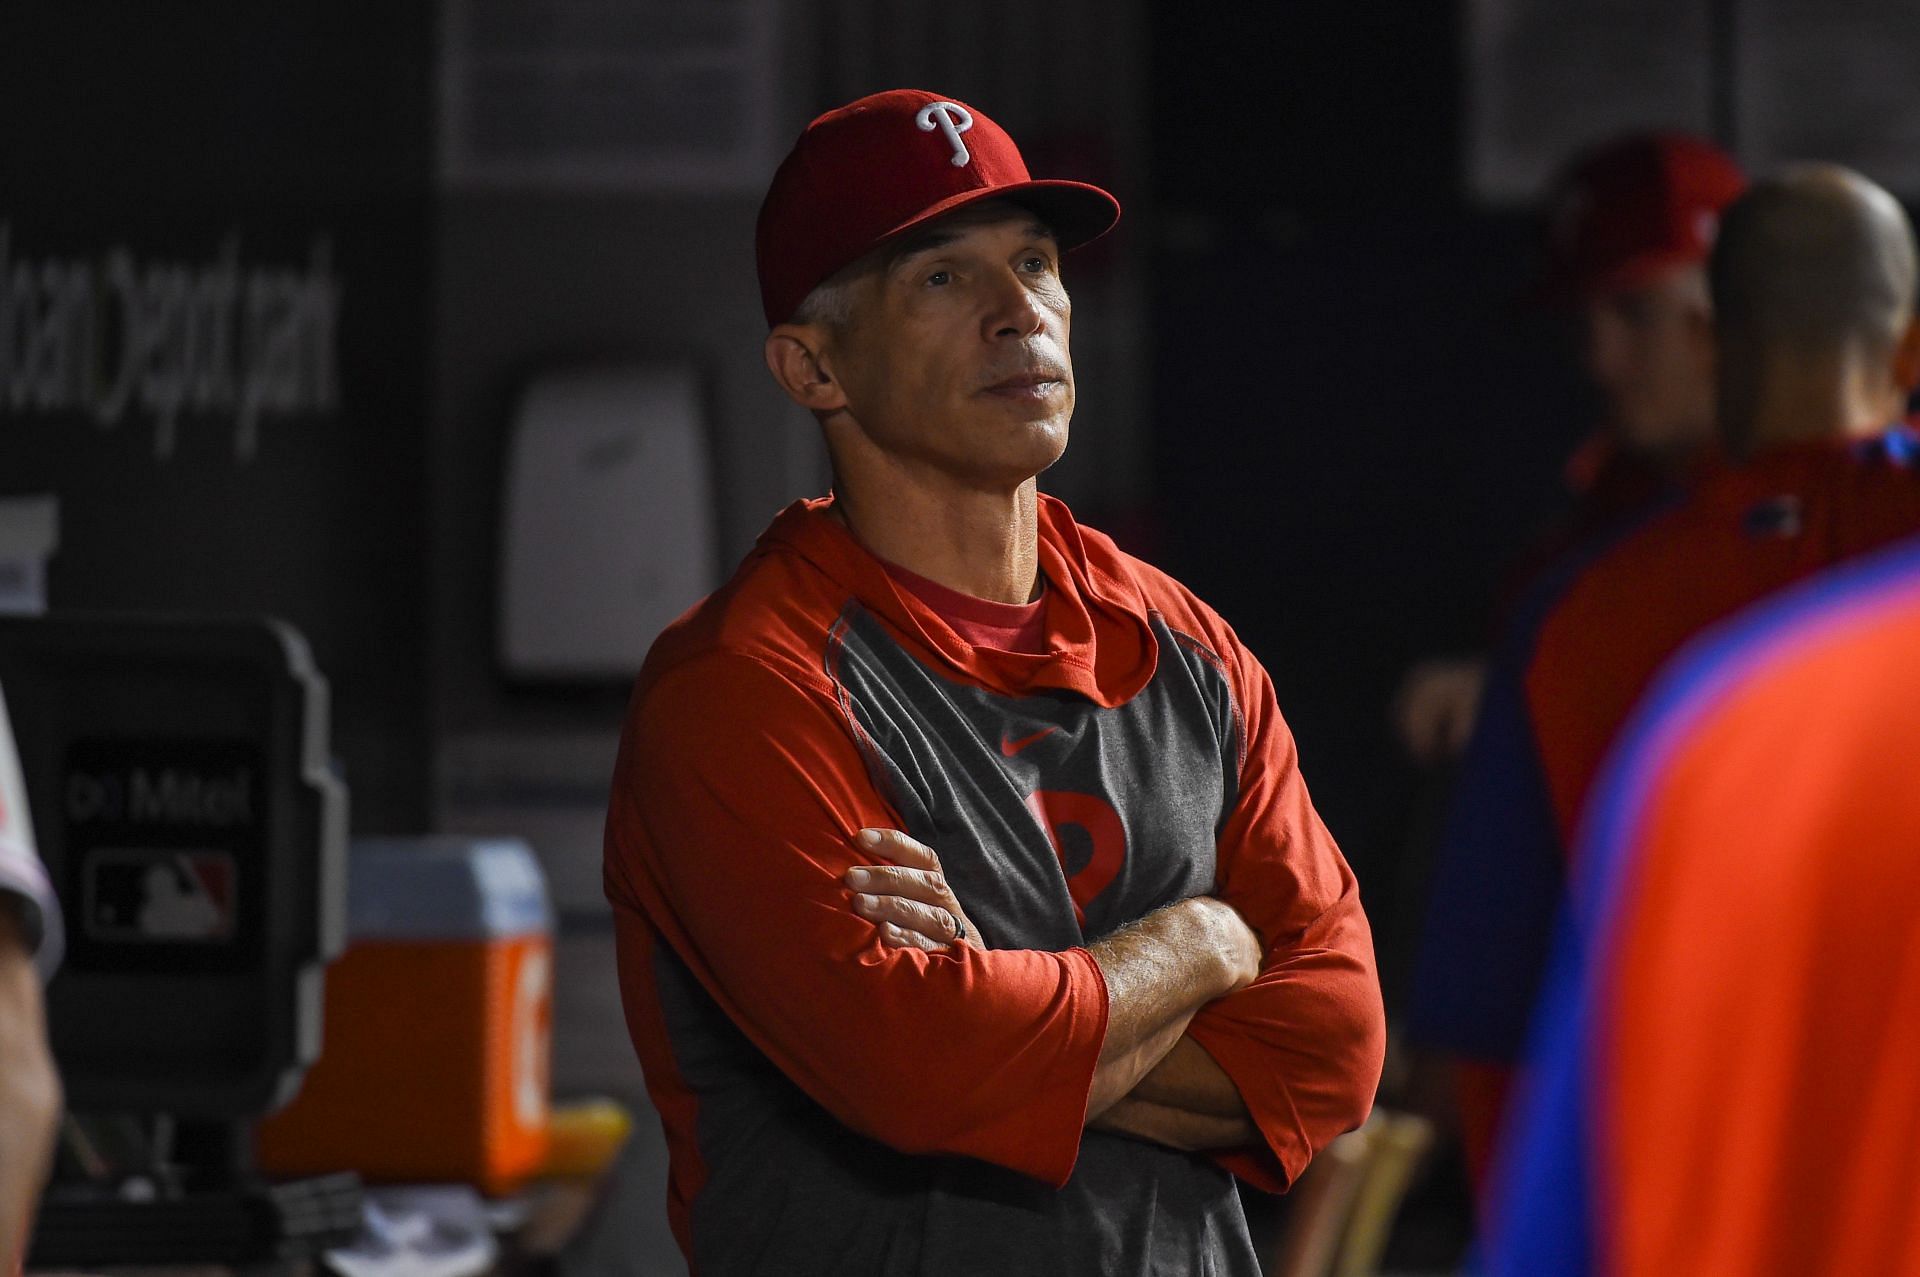 Philadelphia Phillies manager Joe Girardi is at the object of a Twitter storm